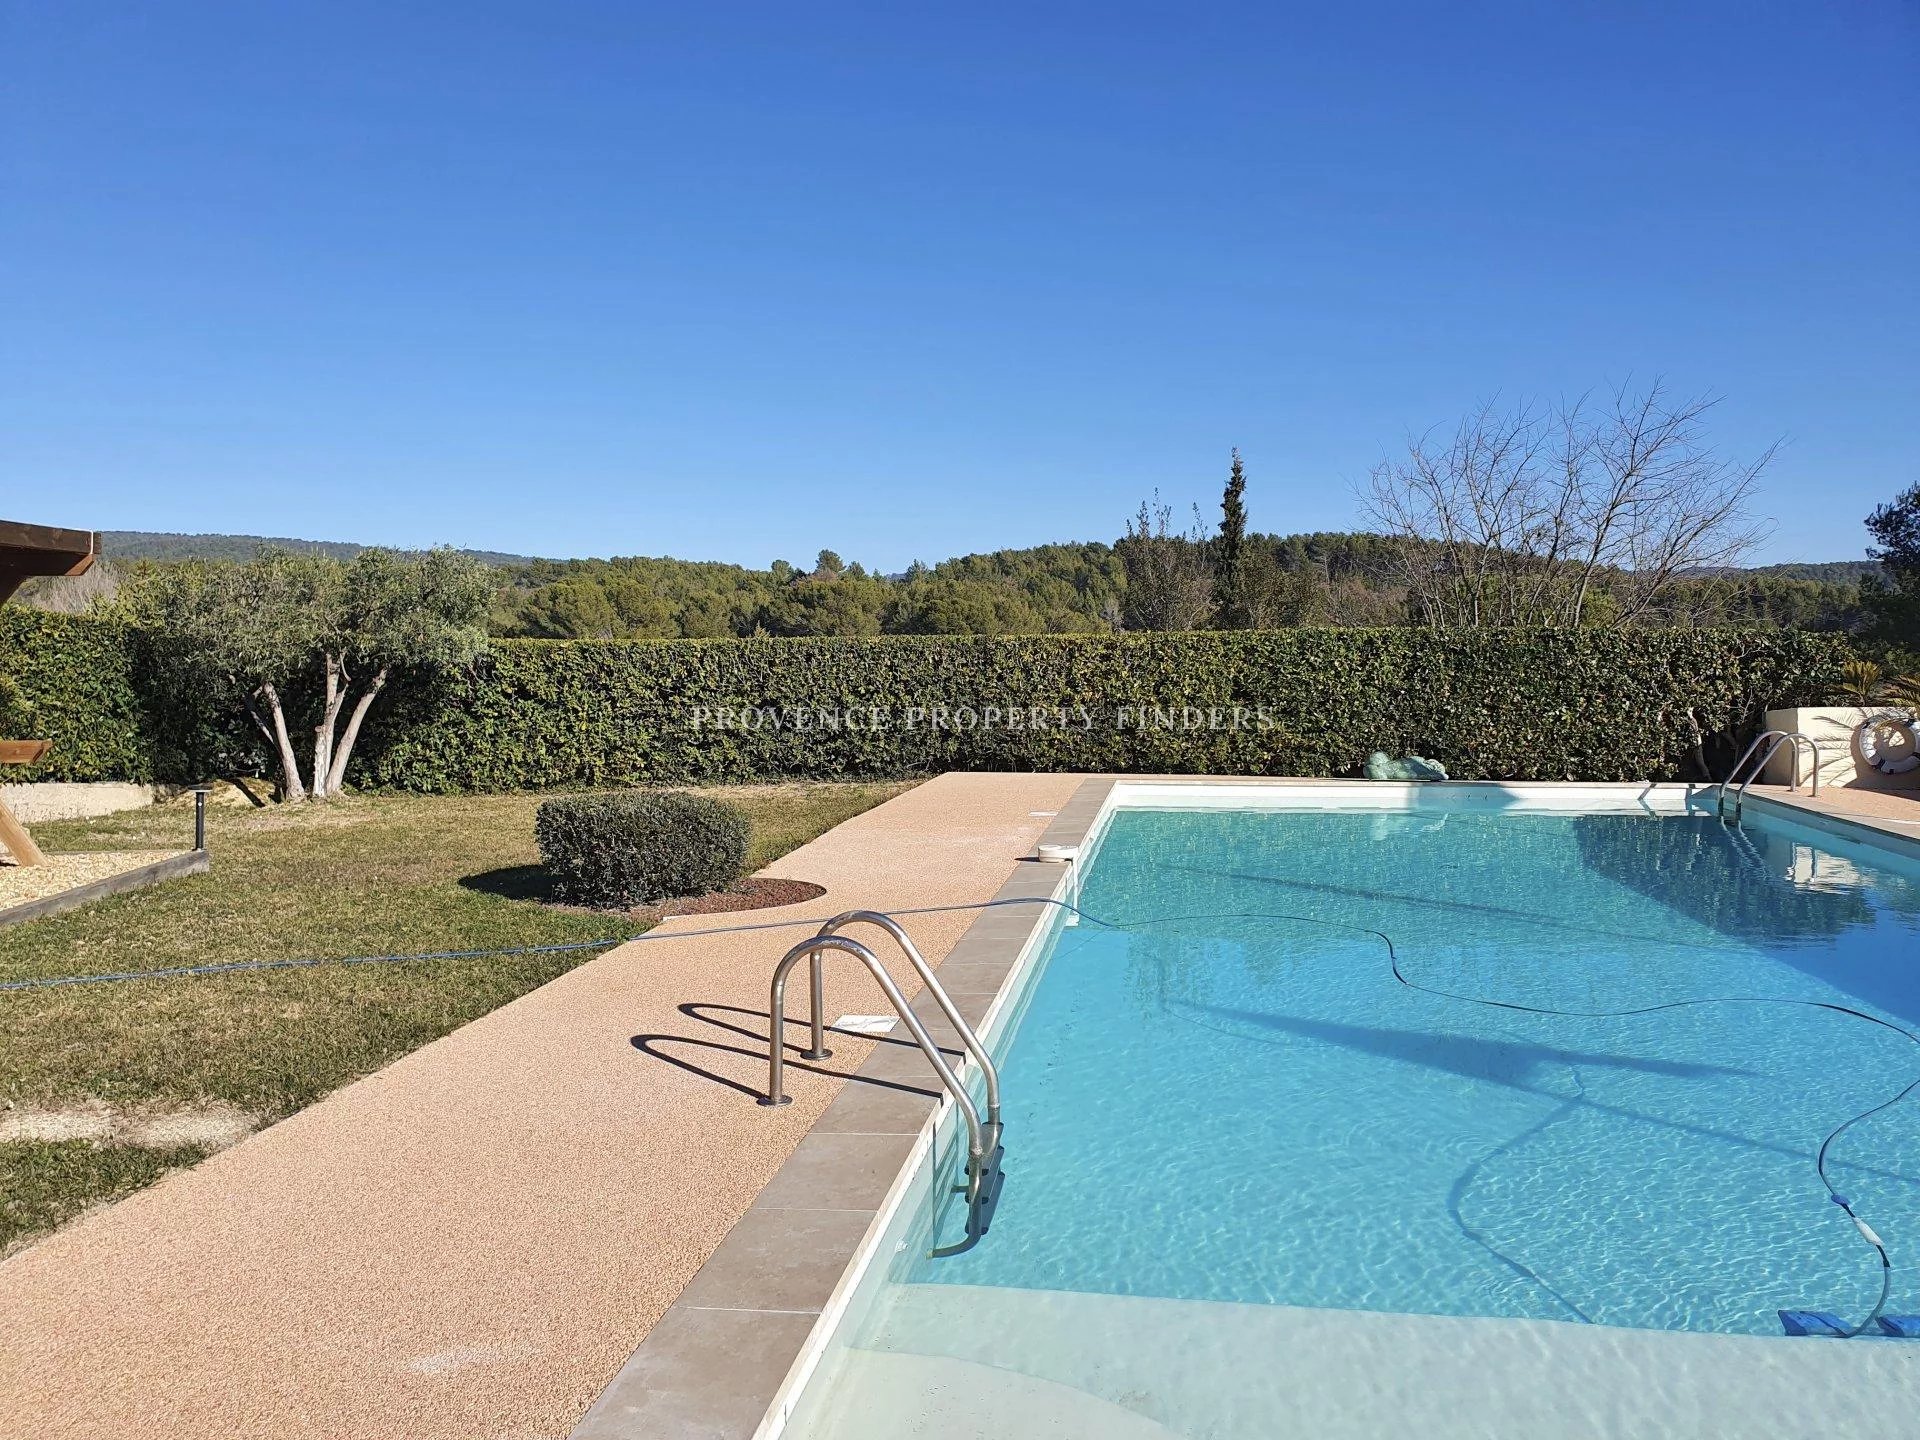 Bastide for sale in Flayosc, lots of potential. Walking distance to the village.